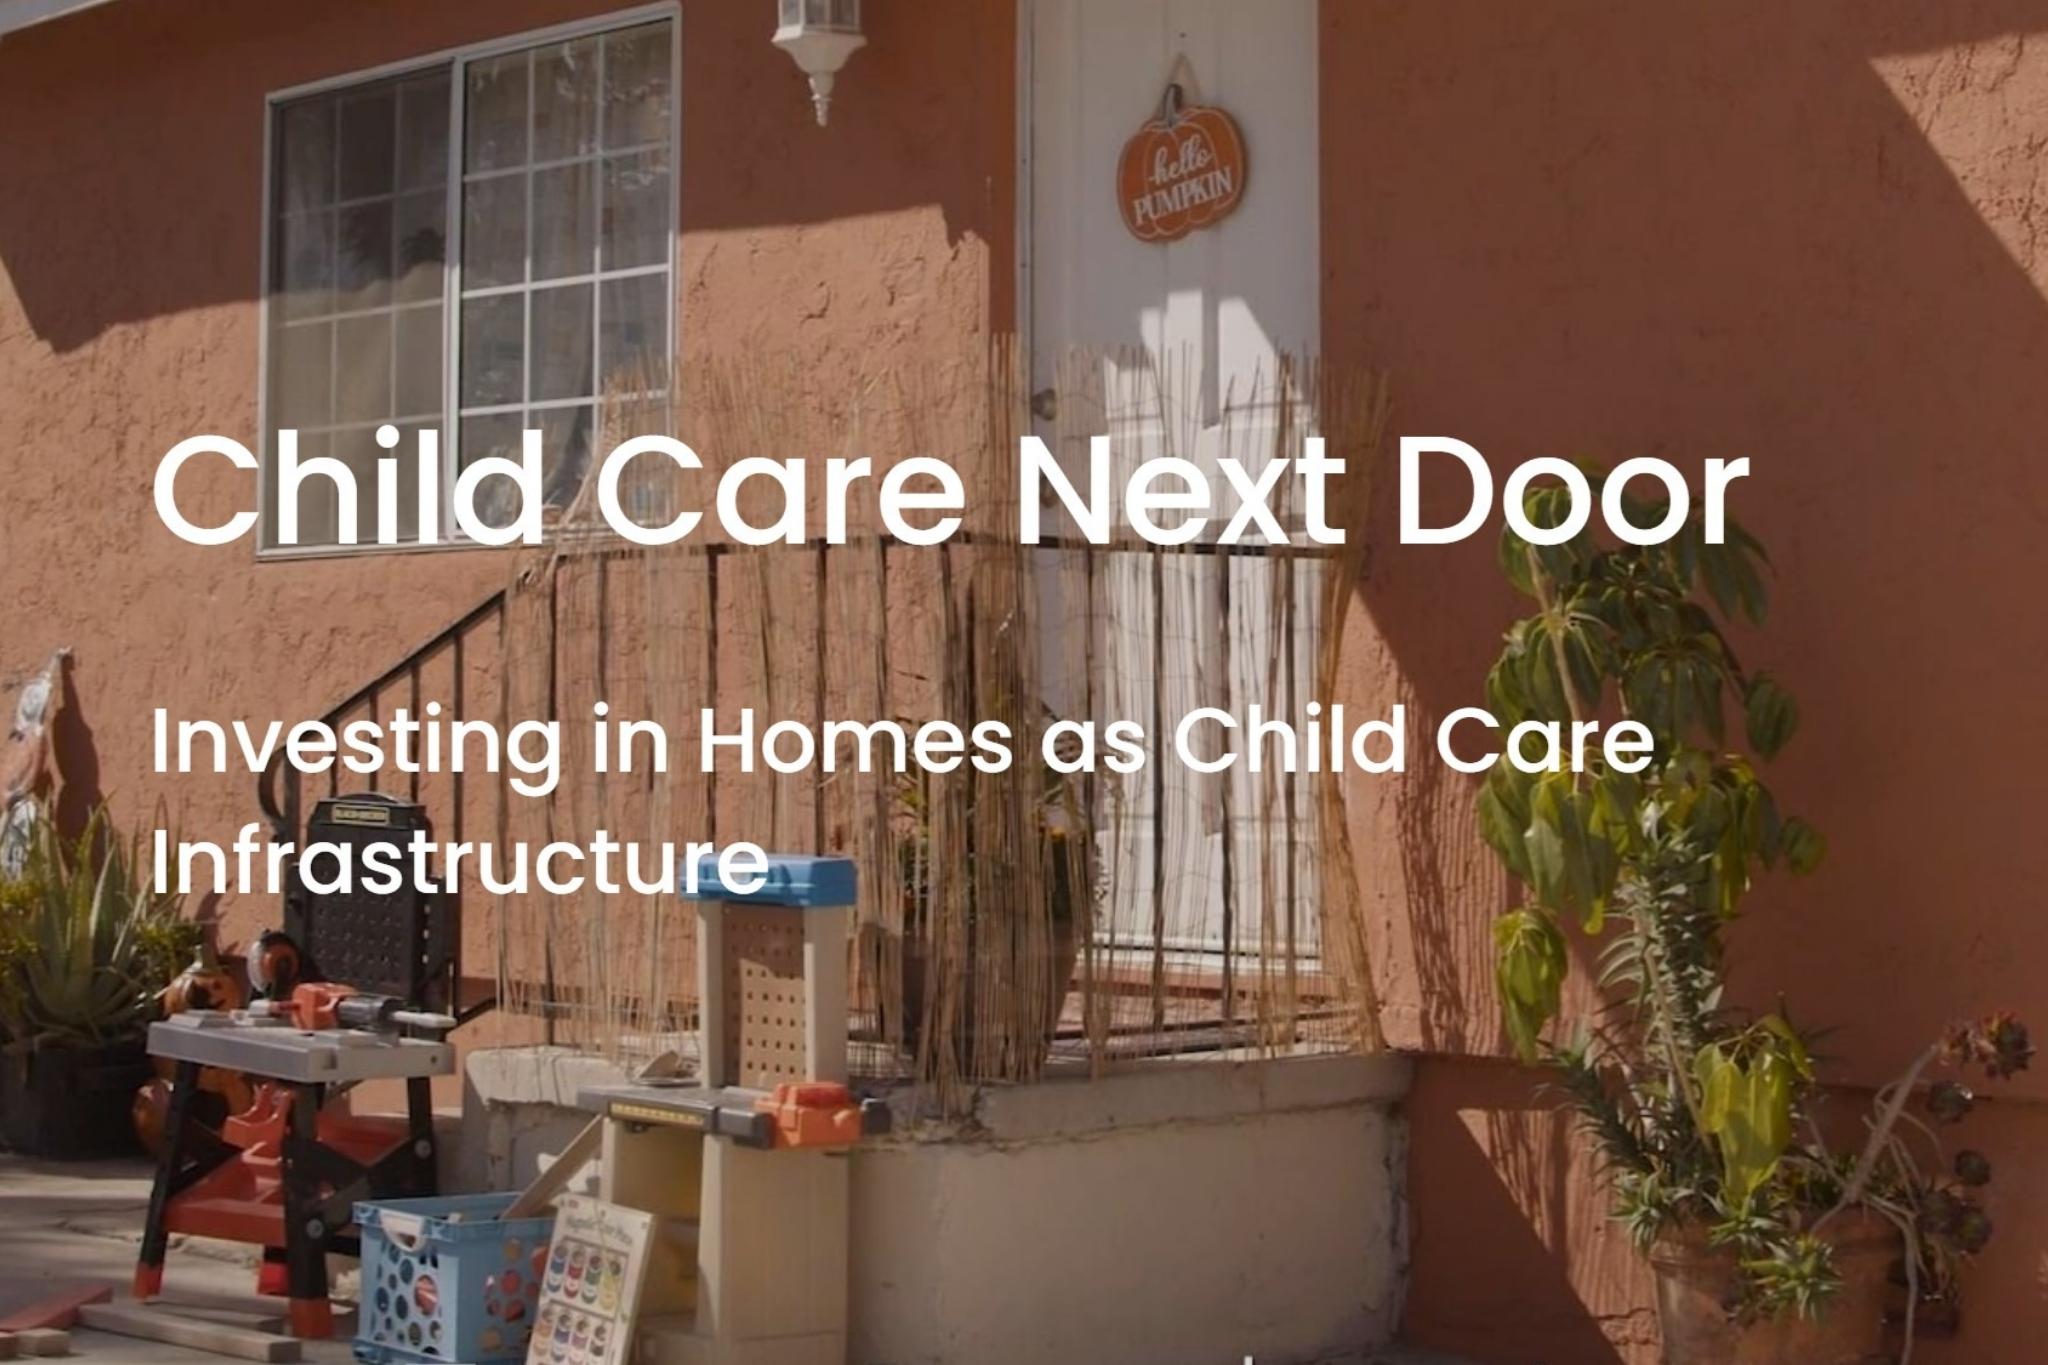 Child Care Next Door: Investing in Homes as Child Care Infrastructure